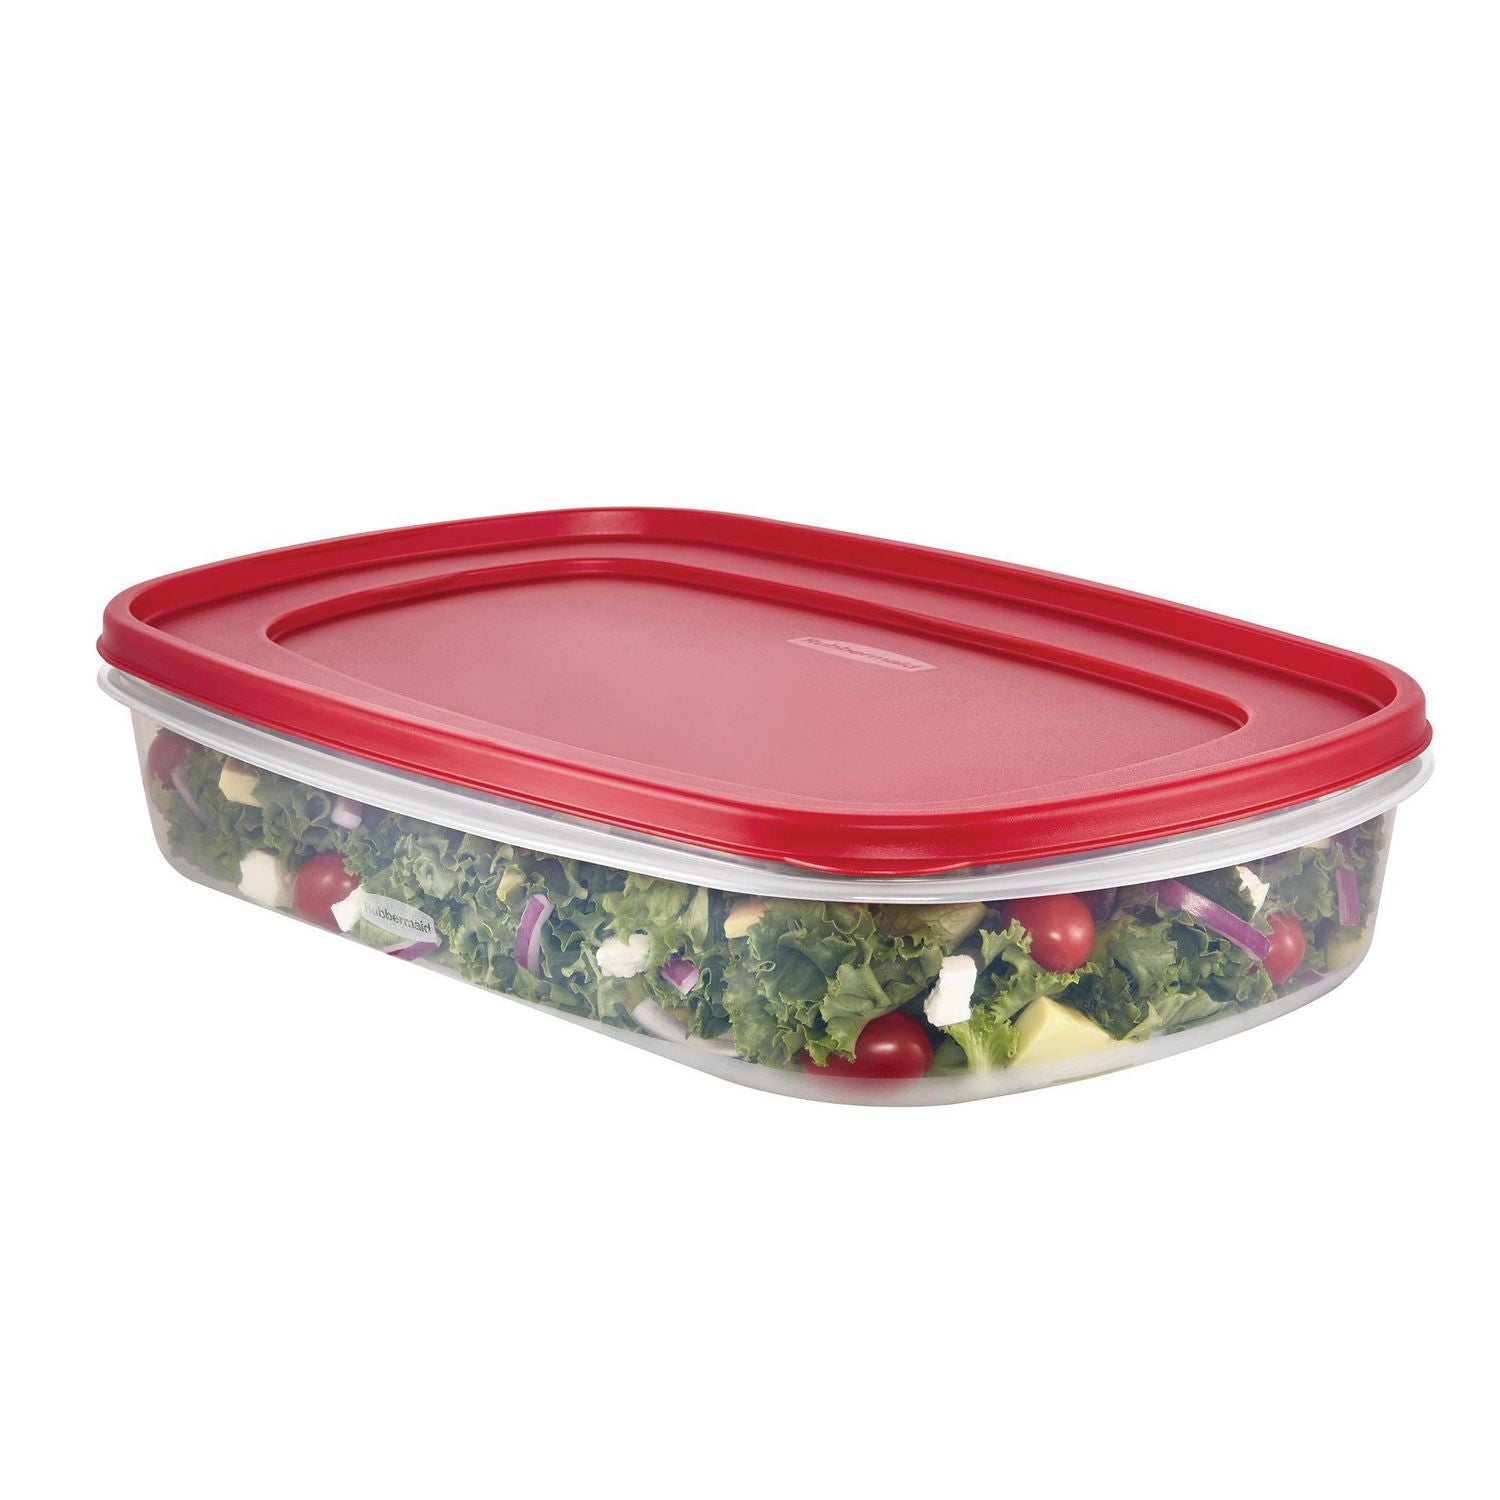 Rubbermaid EasyFindLids Rectangle Food Storage Container, 5.6L